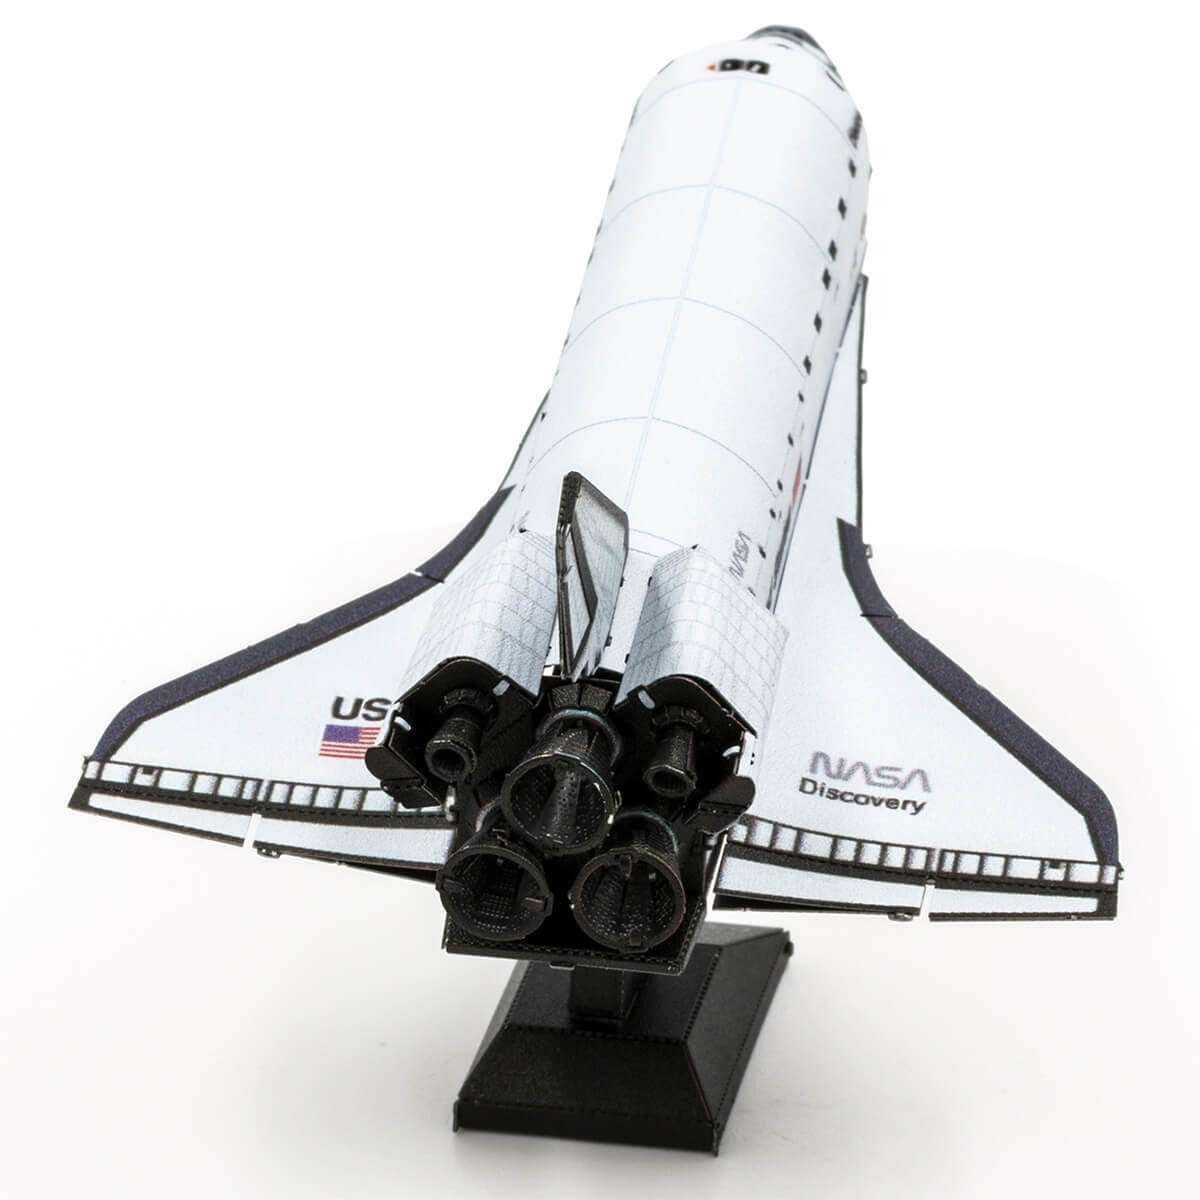 Metal Earth Space Shuttle Discovery NASA Orbiter 1:355 scale 3D Model DIY Kit 